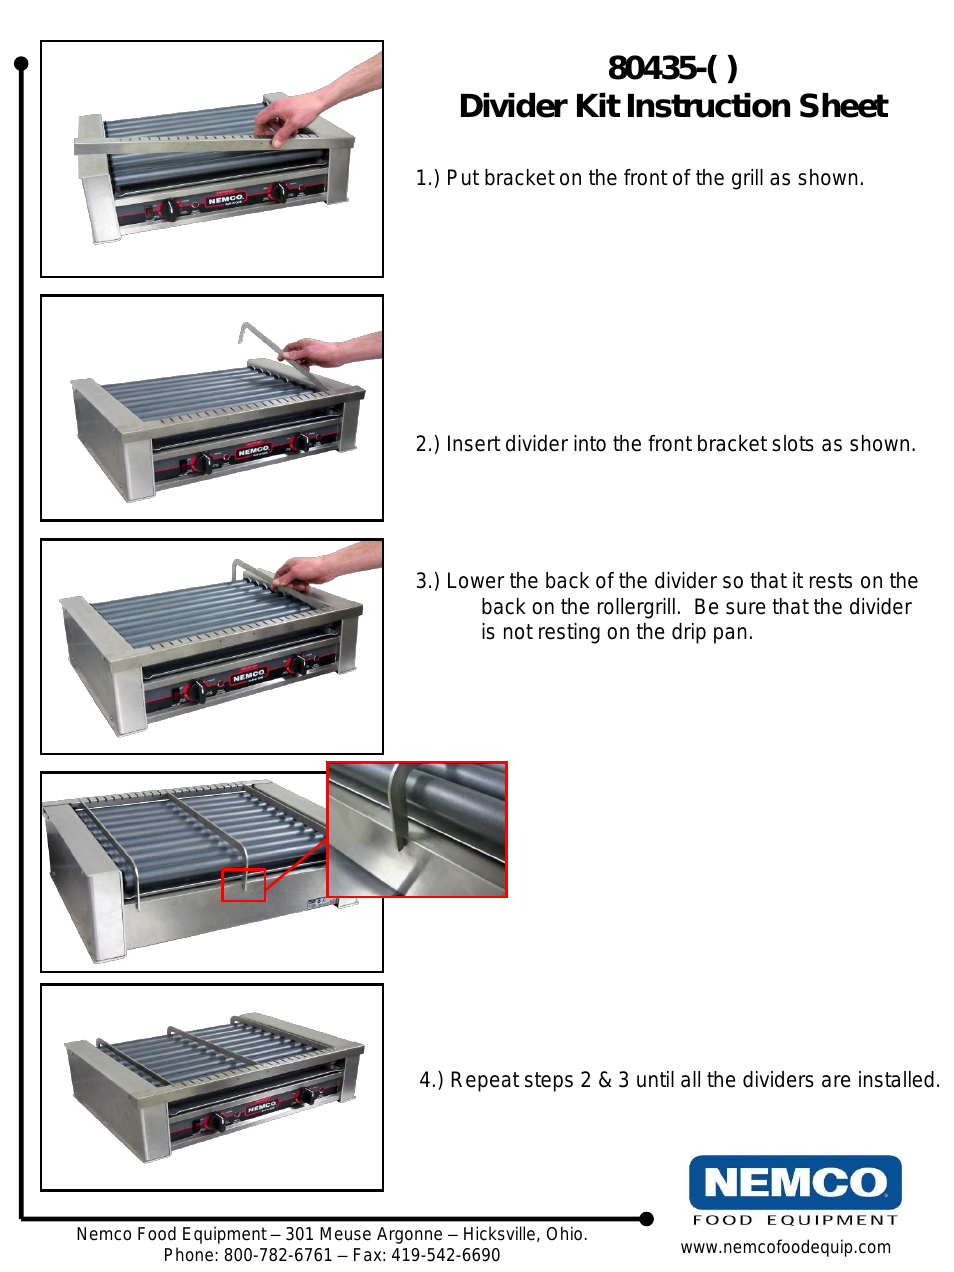 Hot Dog Roller Grill Accessories 80435 Series Divider Kit - Instruction Sheet